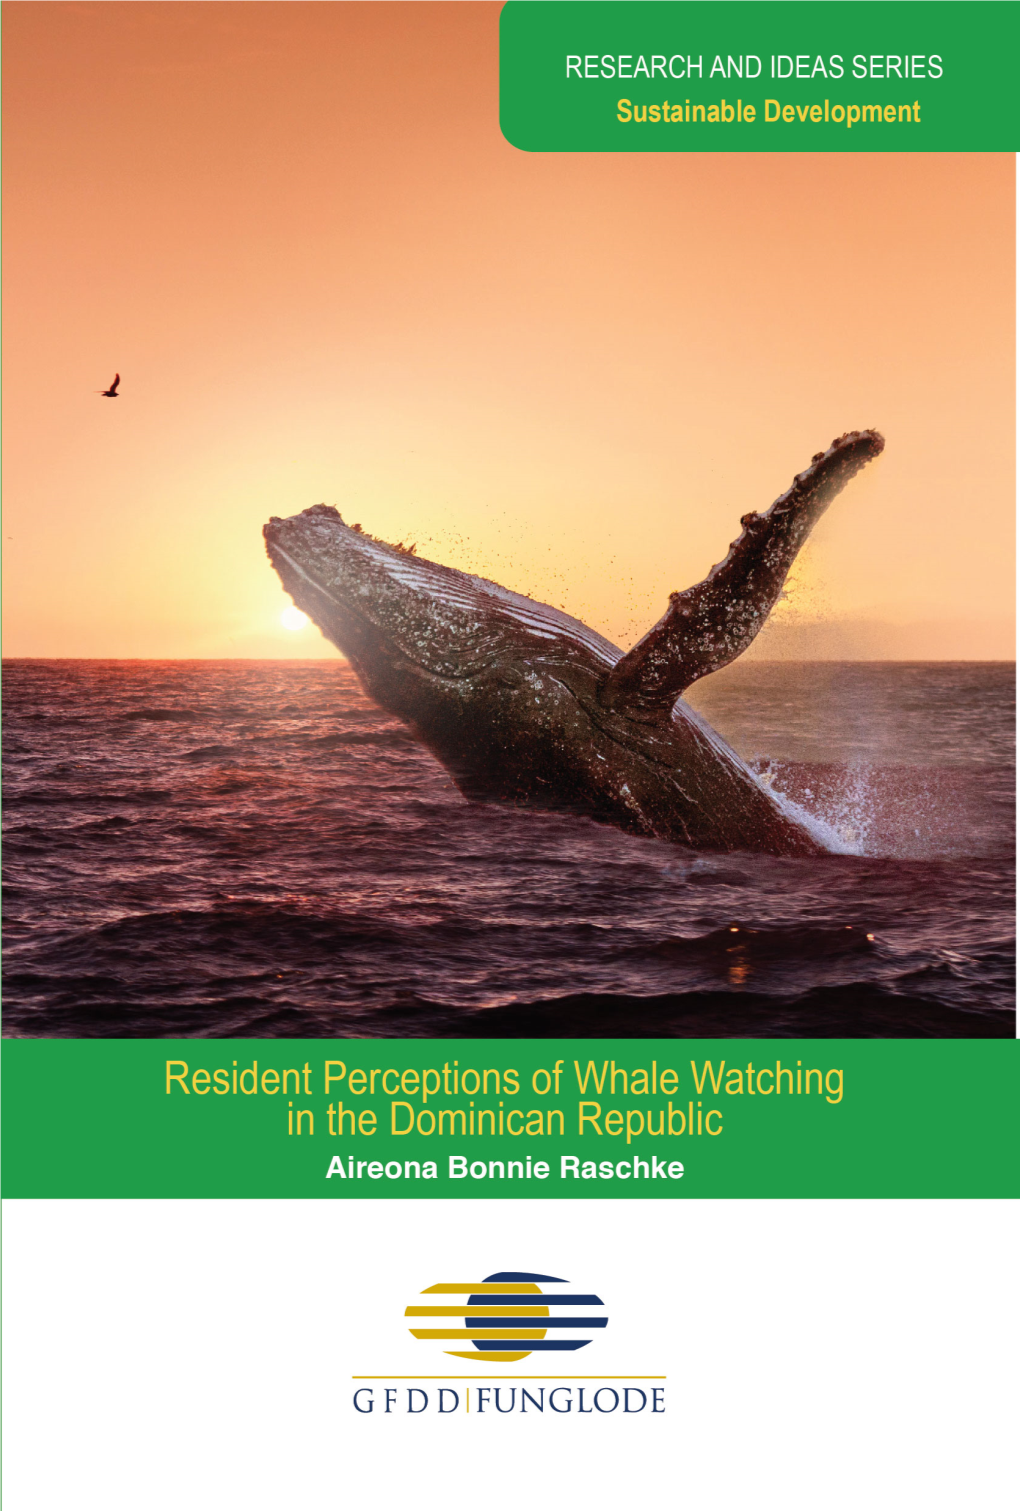 Resident Perceptions of Whale Watching in the Dominican Republic Other Books in the Research and Ideas Series